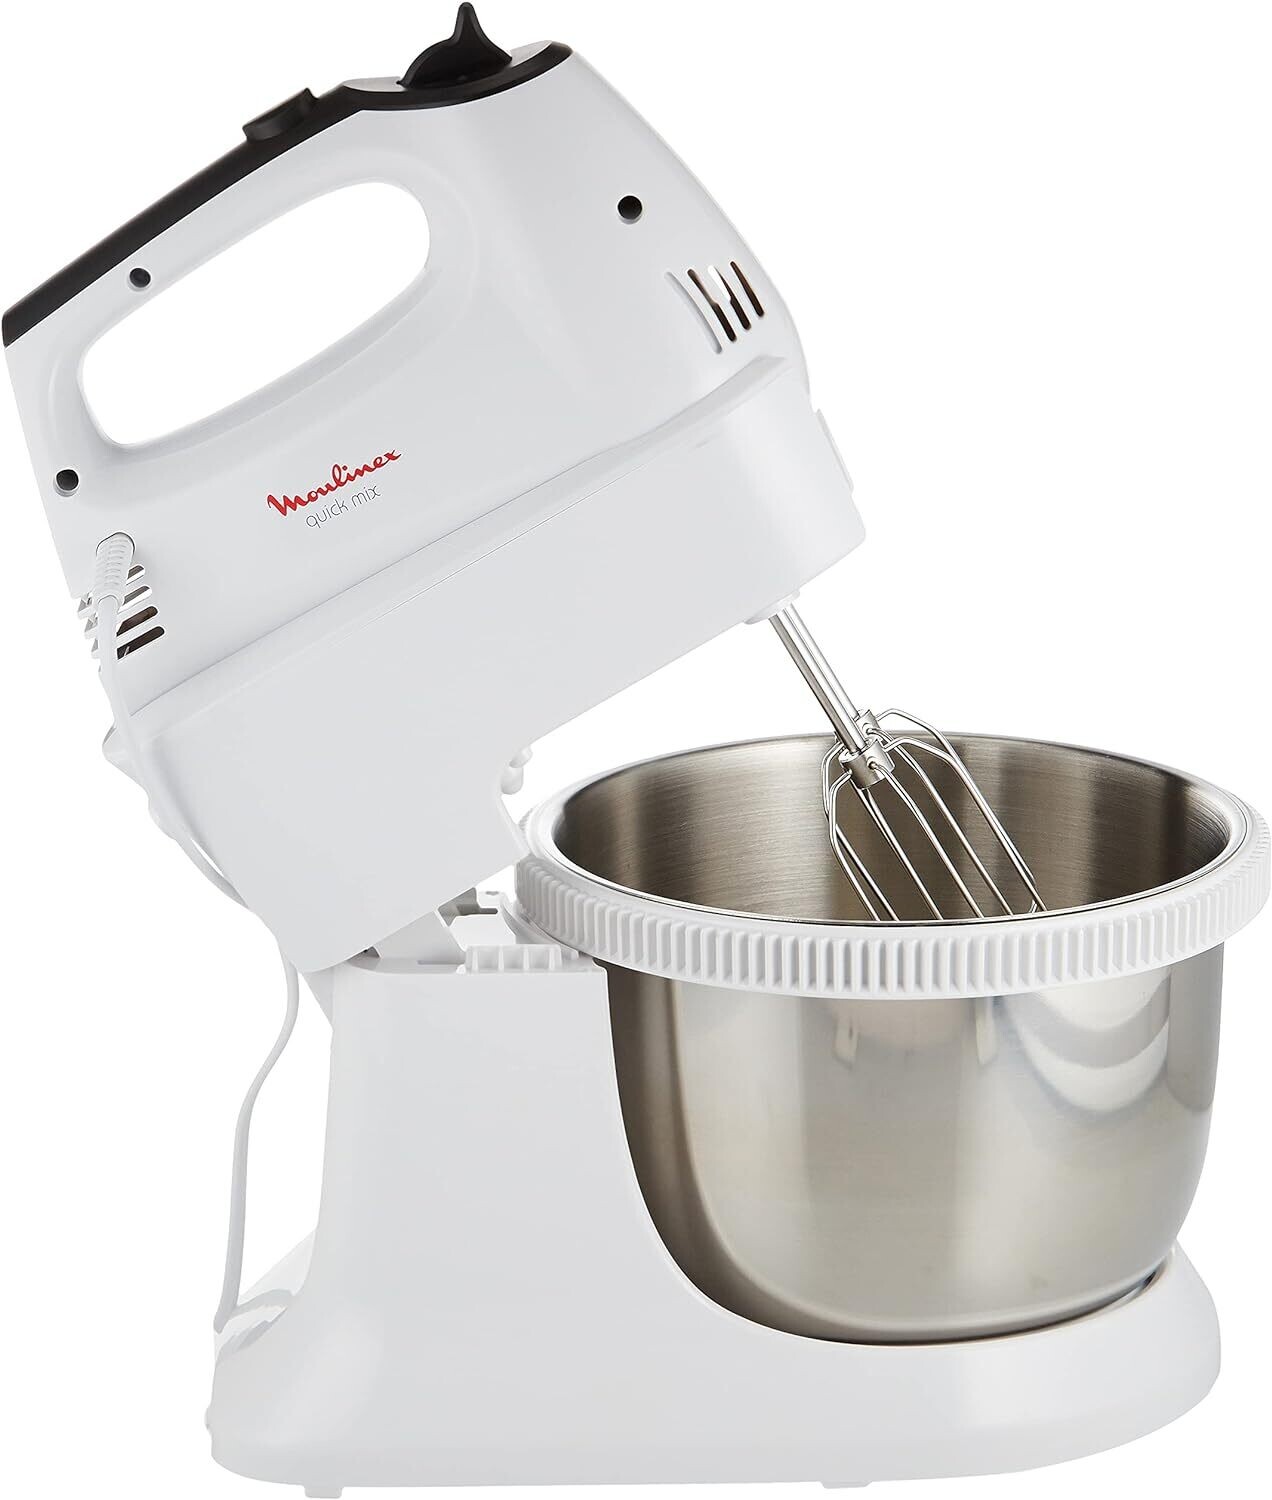 MOULINEX Quick Mix Hand Mixer with 3.5 Liter Stand Bowl, 300 Watts, Off White, Stainless Steel/Plastic, HM312127